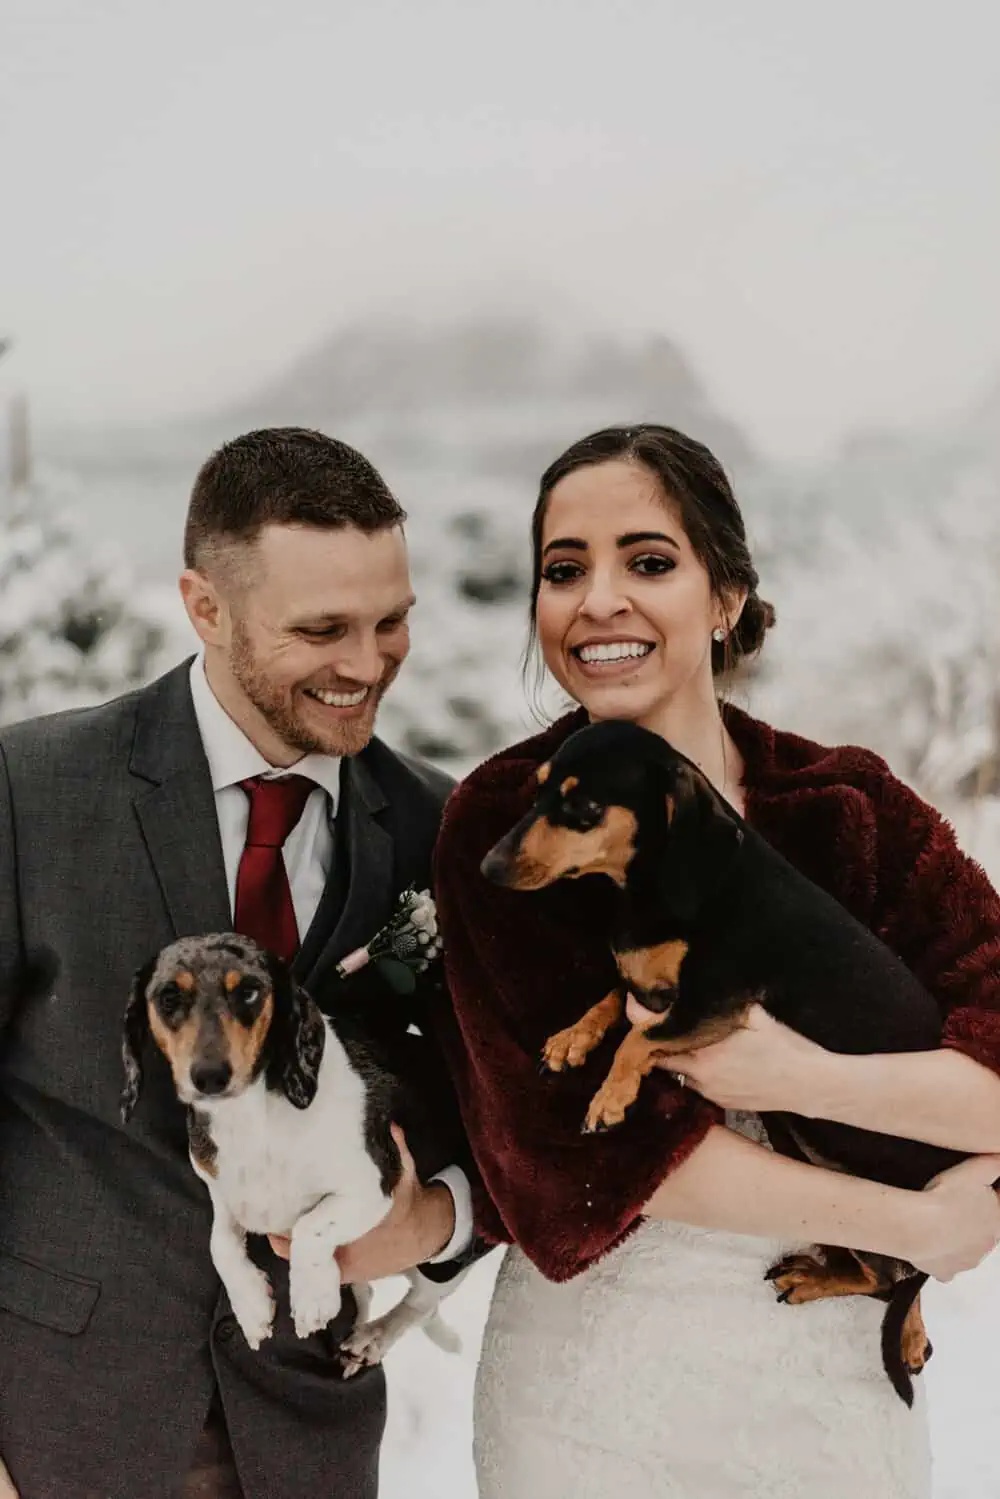 A couple poses for a photo in the snow with their dogs.